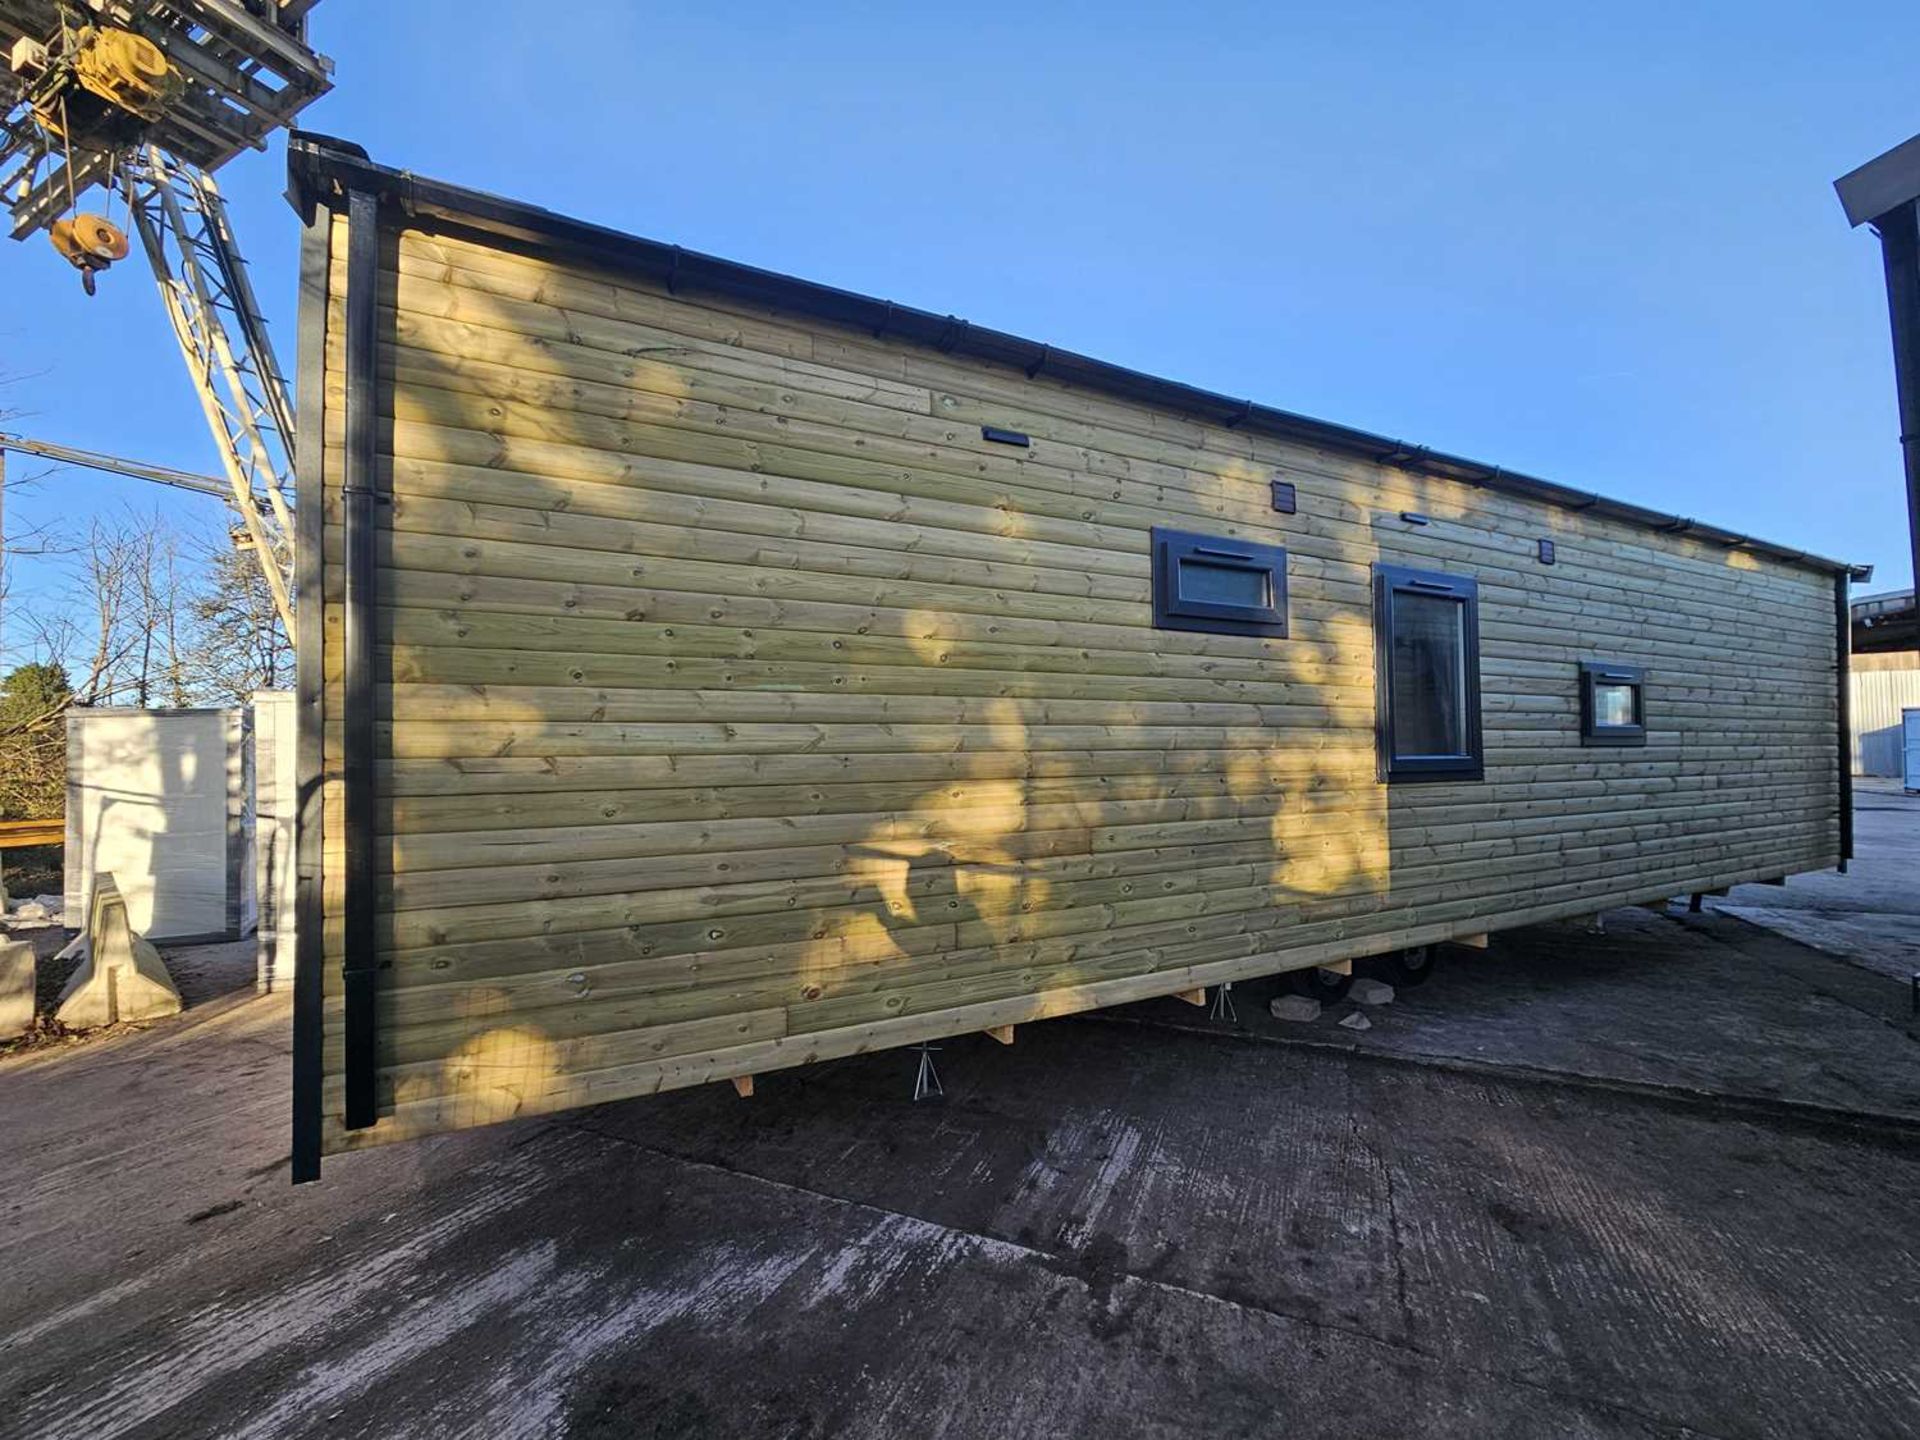 Unused The Steel Holiday Homes Ltd 36' x 12' (Steel Structure) 2 Bedroom Timber Clad Lodge, Shower R - Image 3 of 23